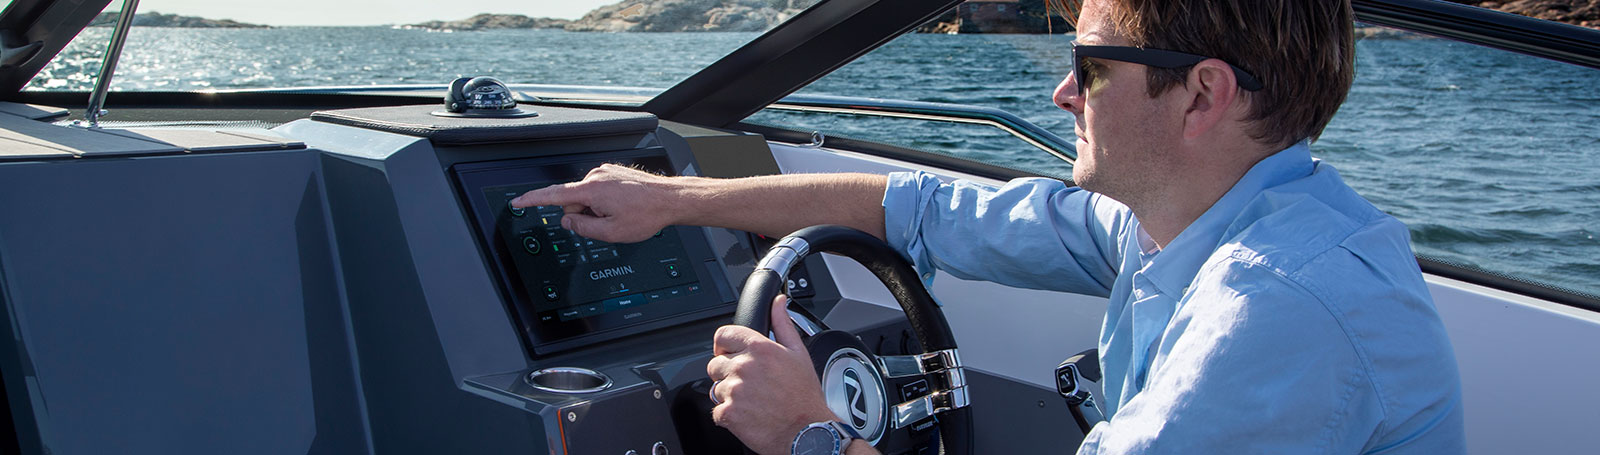 Connect to everything on your boat.